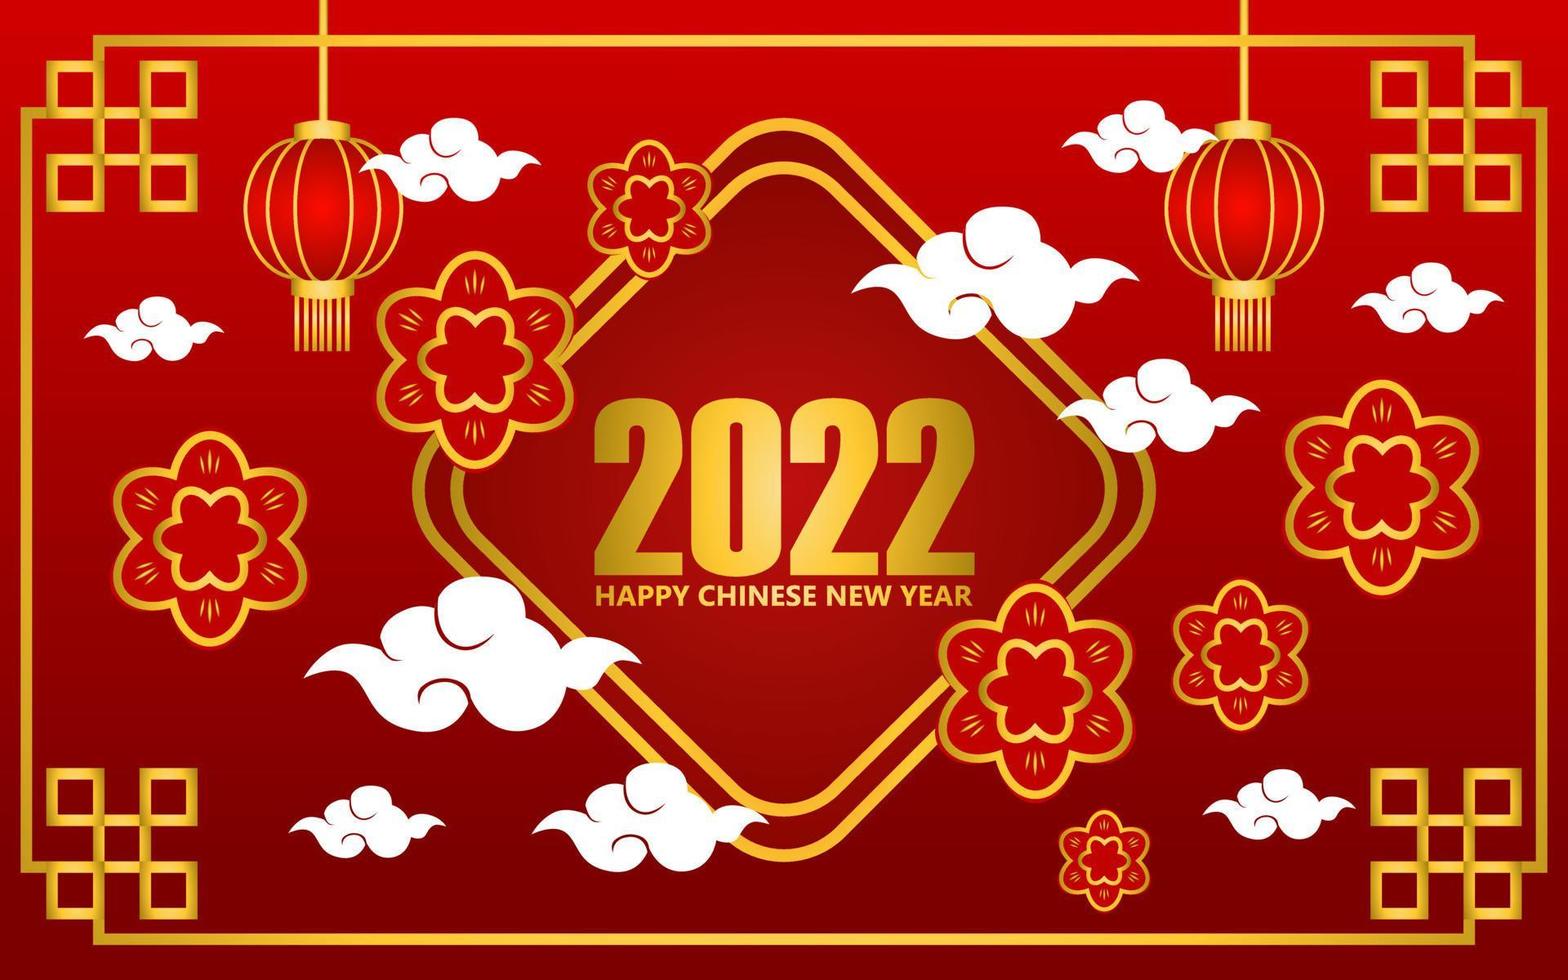 Chinese new year 2022 greeting background design in red color. designs for banners and covers. chinese ornament design vector